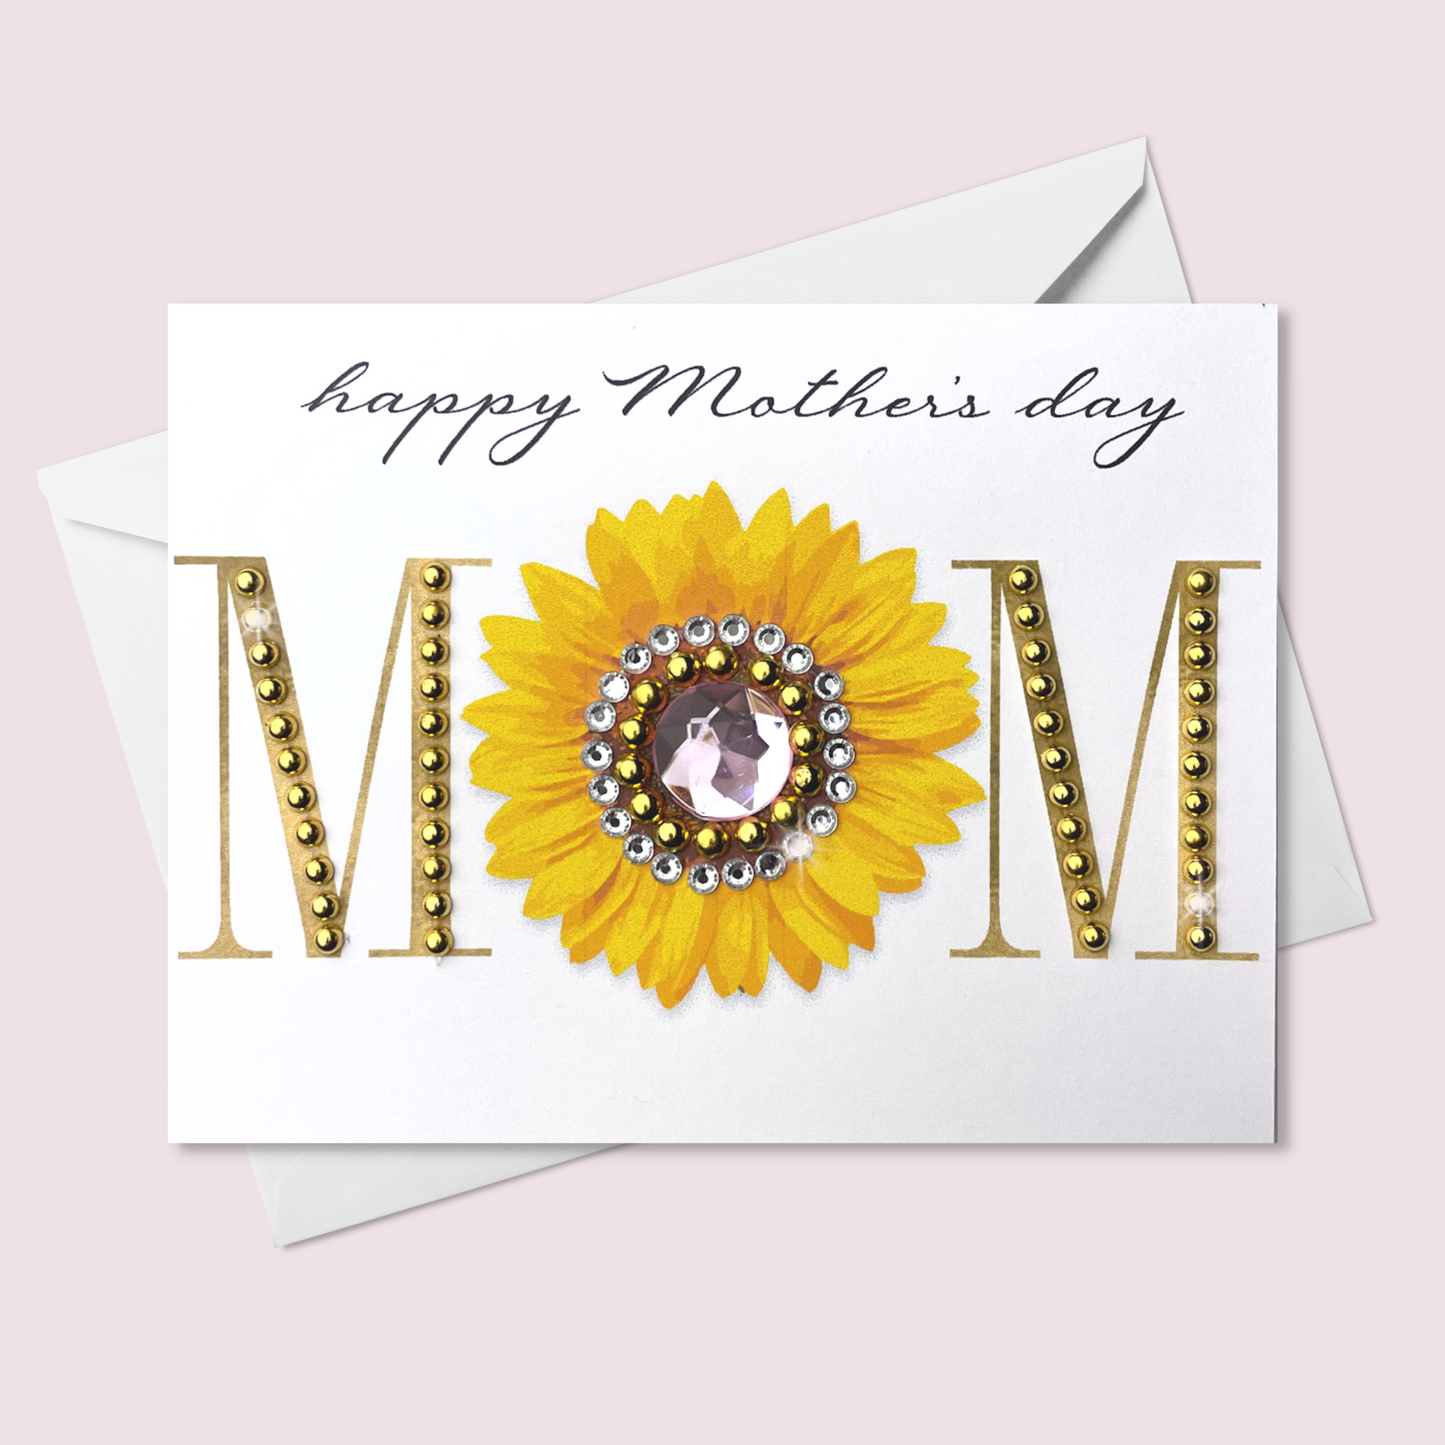 Happy mother's day mom sunflower